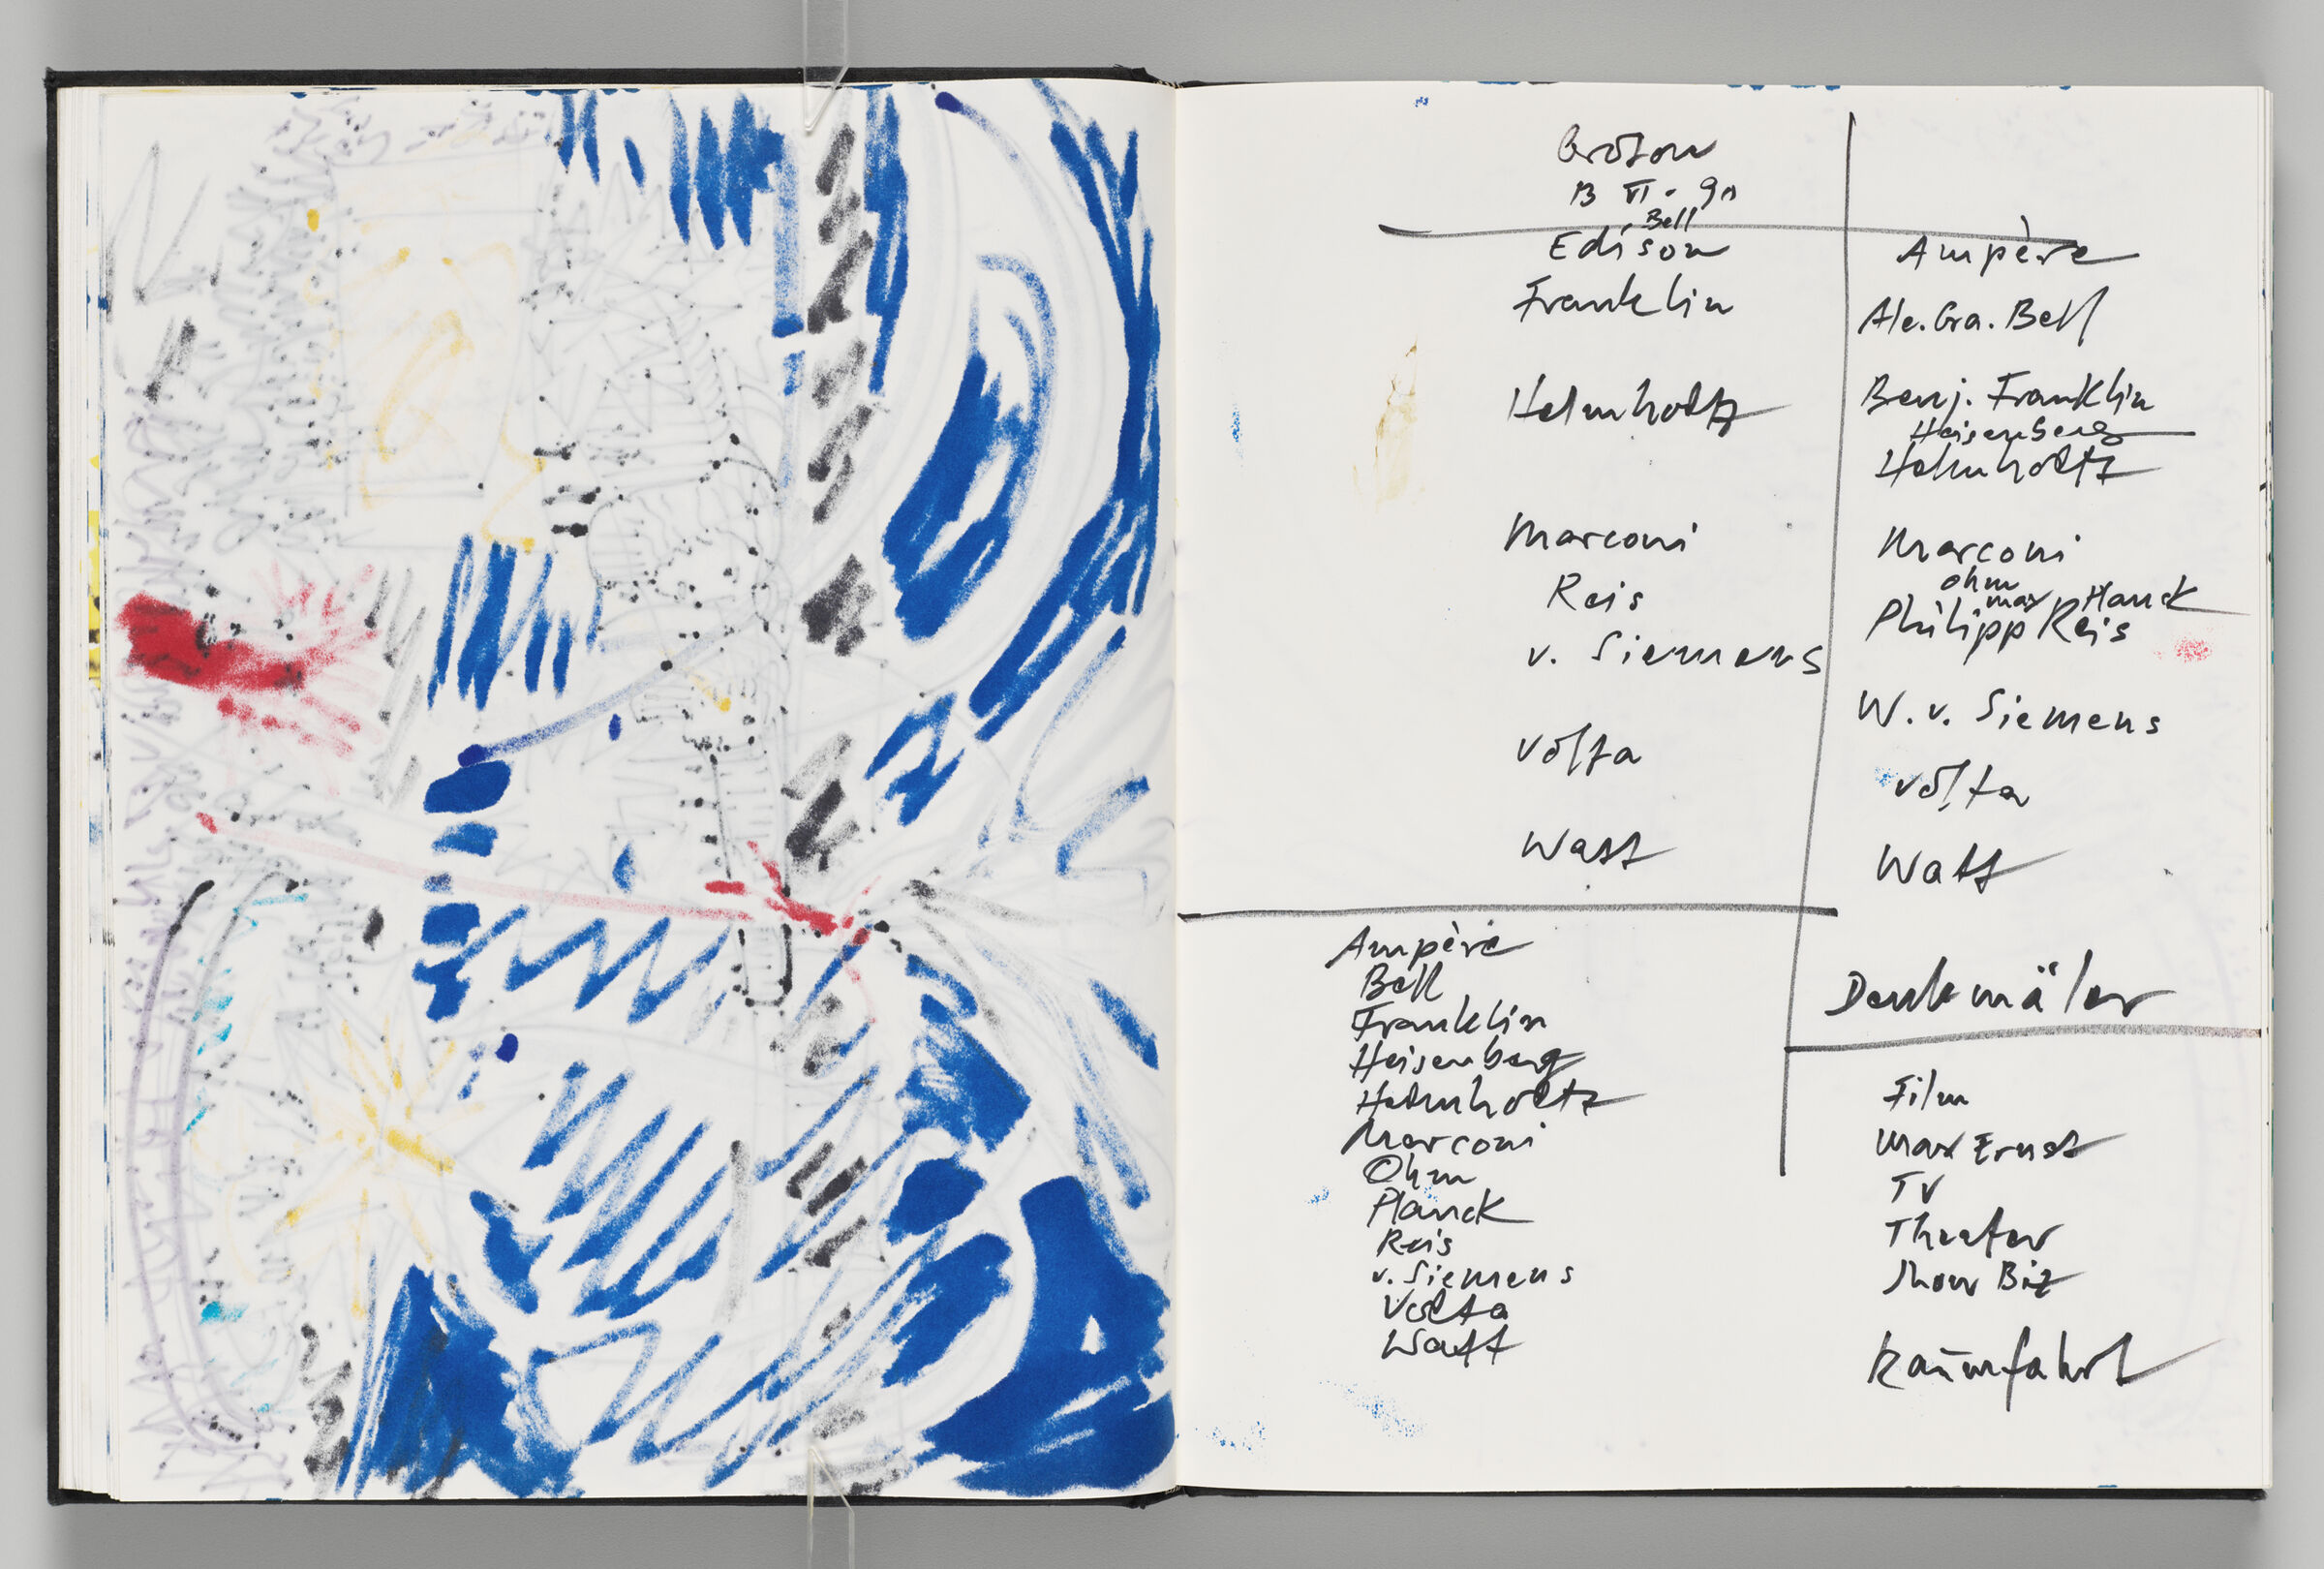 Untitled (Bleed-Through Of Previous Page, Left Page); Untitled (Notes, Right Page)
